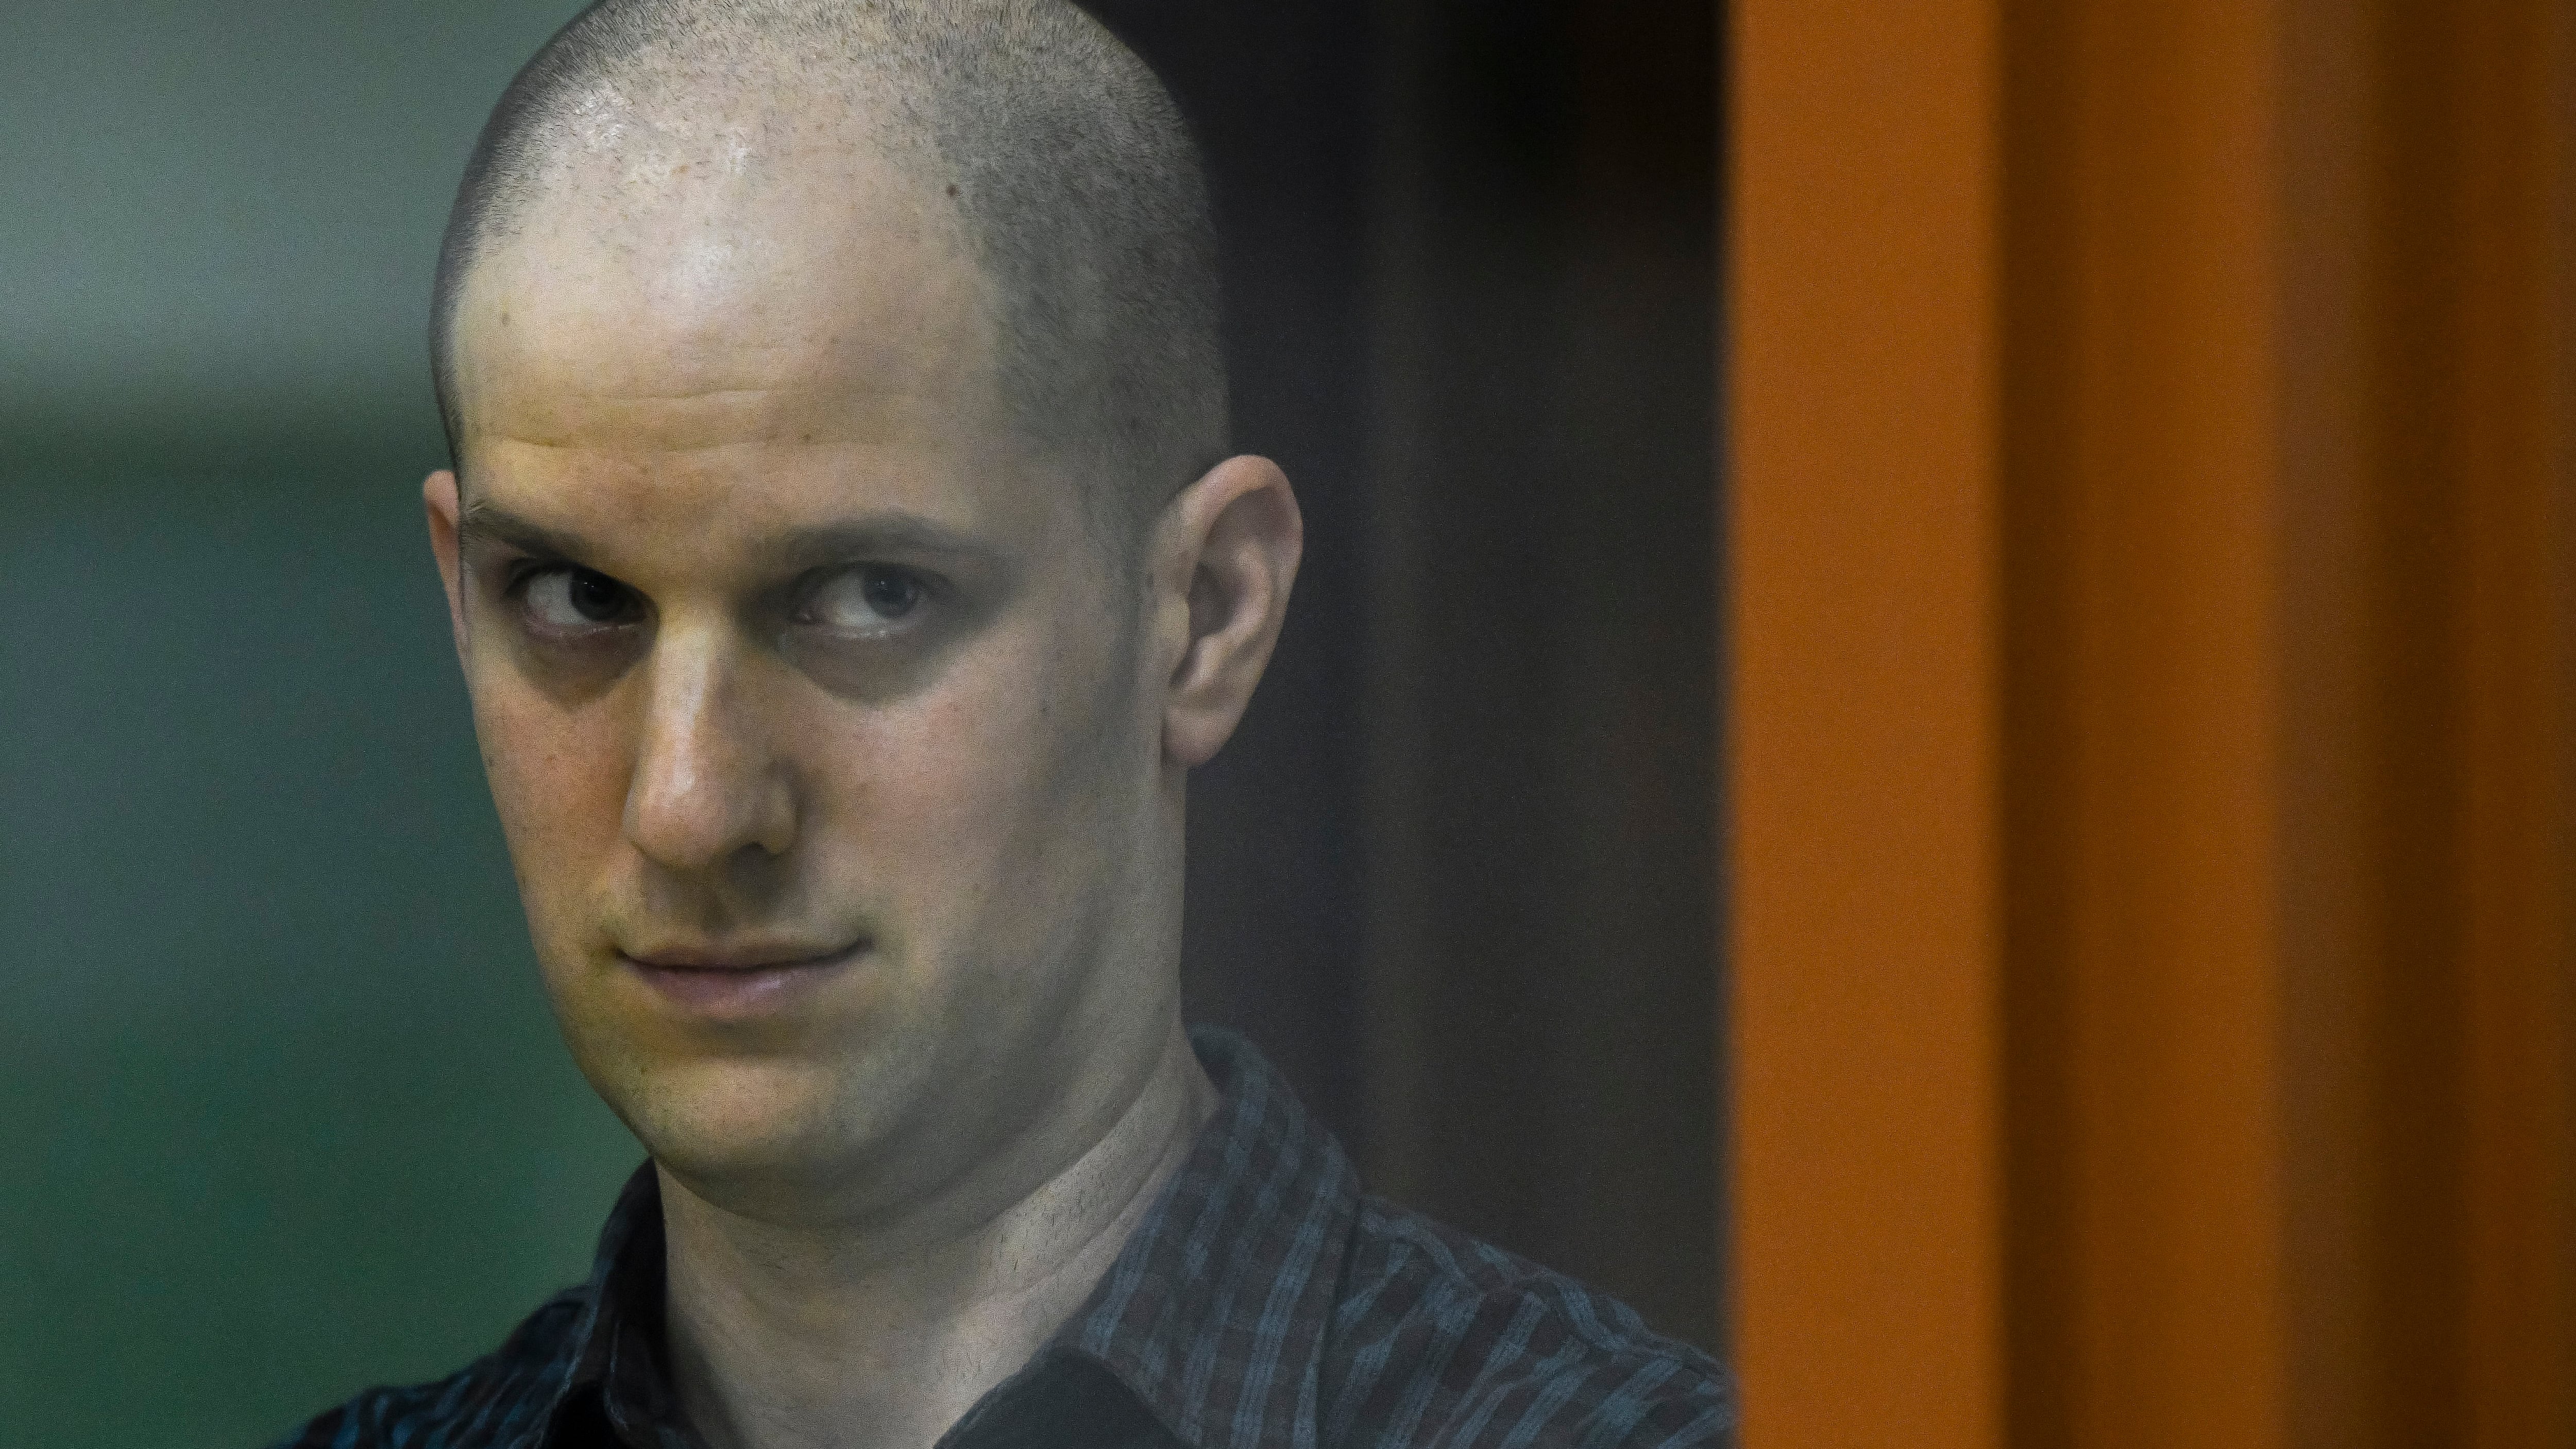 Wall Street Journal reporter Evan Gershkovich stands in a glass cage in a courtroom in Yekaterinburg, Russia (AP)